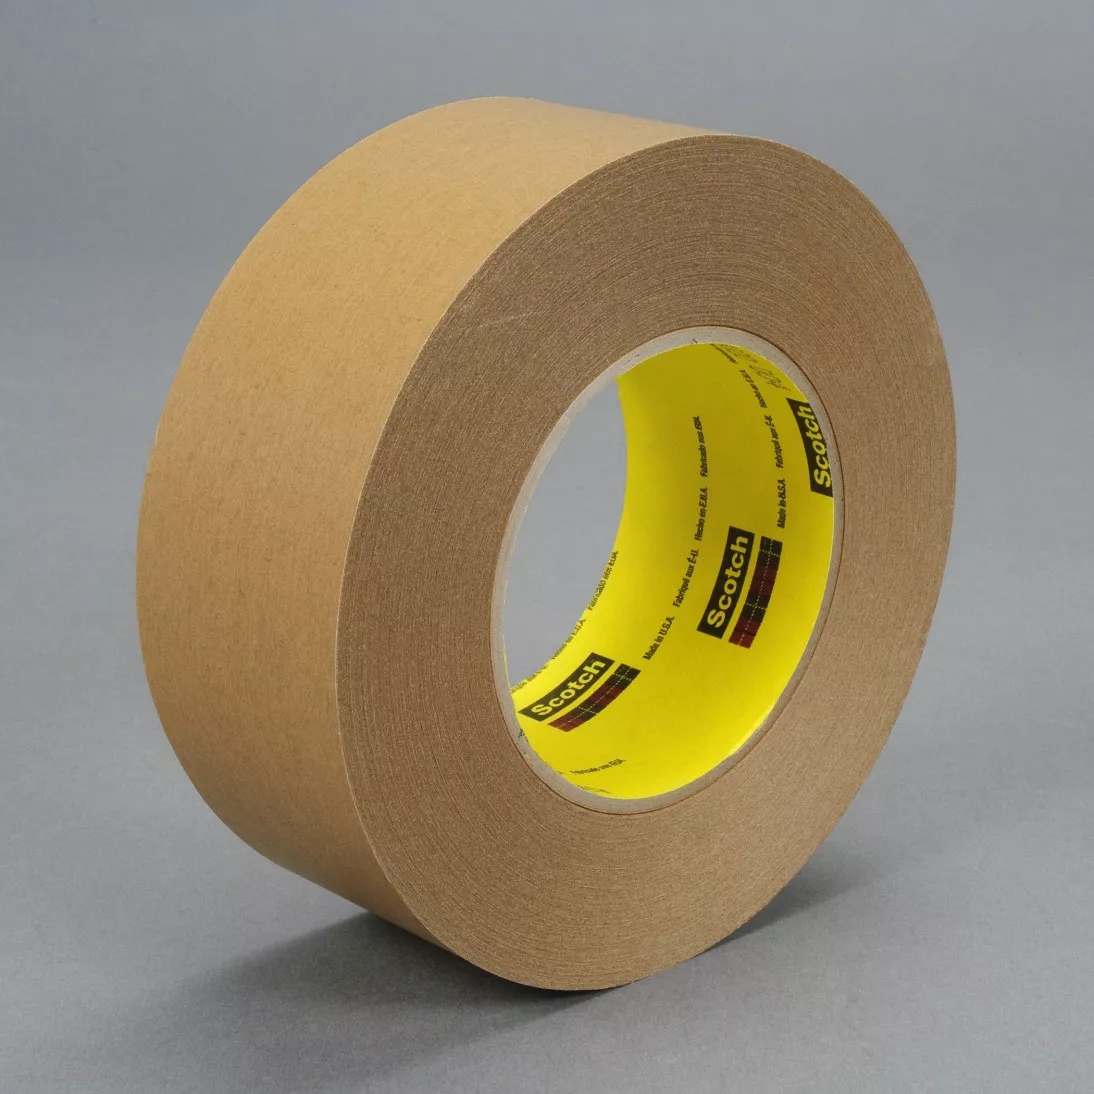 3M™ Repulpable Strong Single Coated Tape R3187, Kraft, 48 mm x 110 m,
7.5 mil, 6 rolls per case